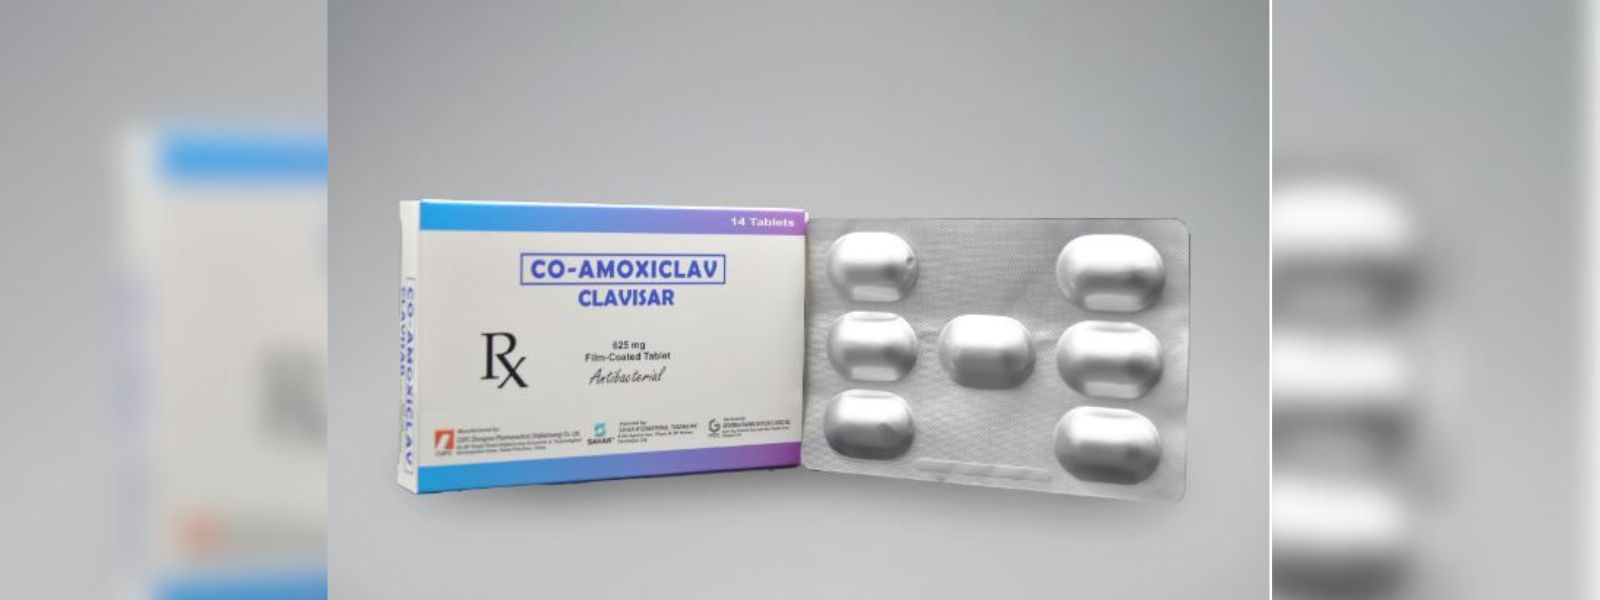 Use of the class of antibiotics named Co-Amoxiclav temporarily suspended.